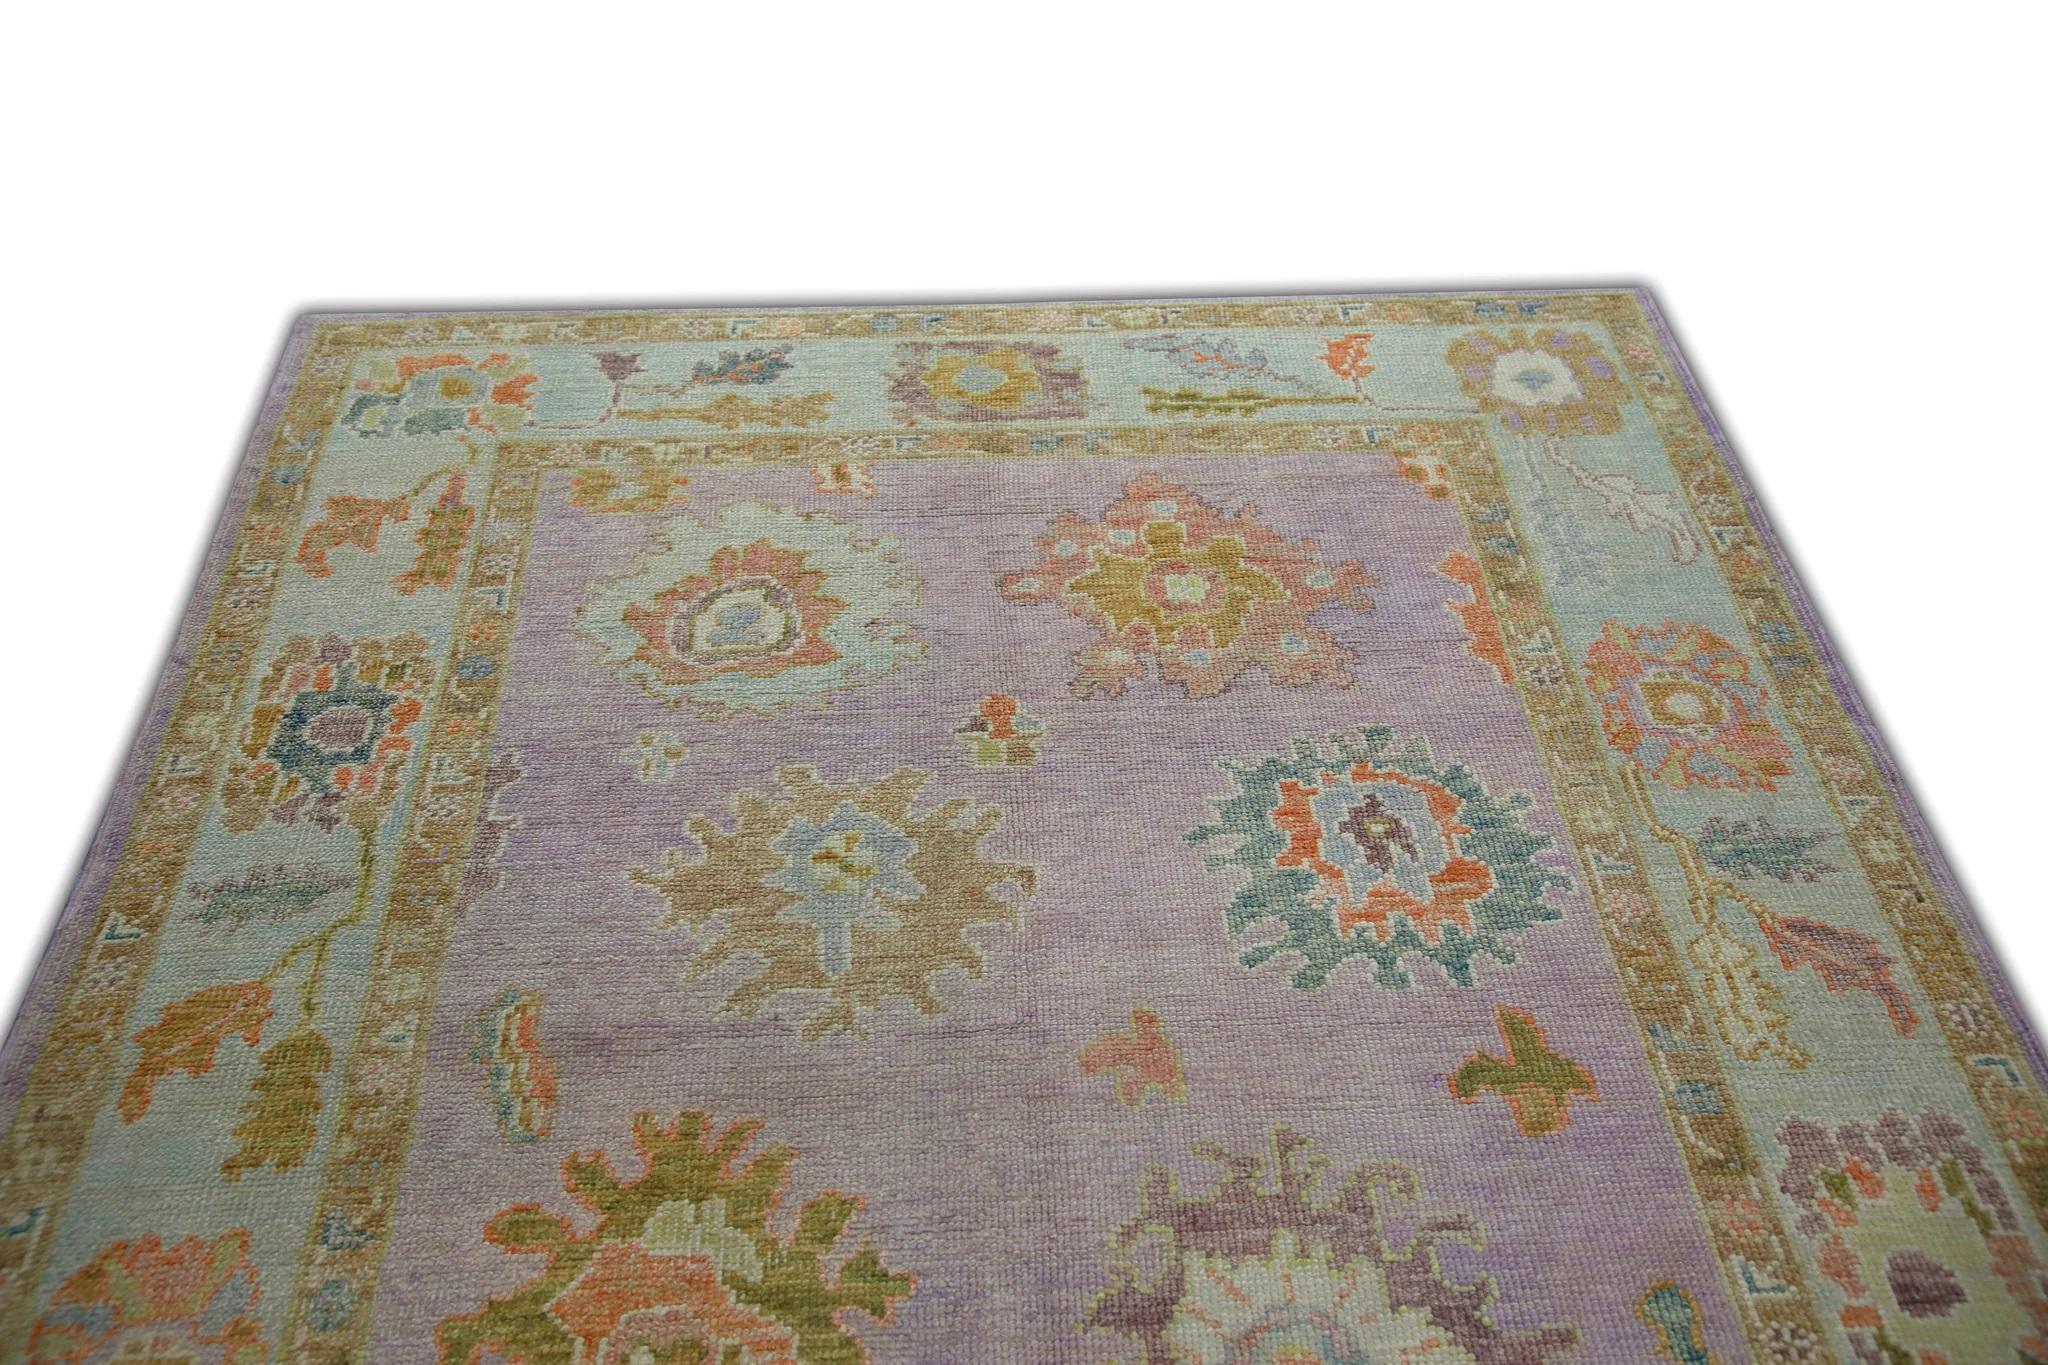 Soft Purple Handwoven Wool Turkish Oushak Rug w/ Colorful Floral Design 5'1x6'8 In New Condition For Sale In Houston, TX